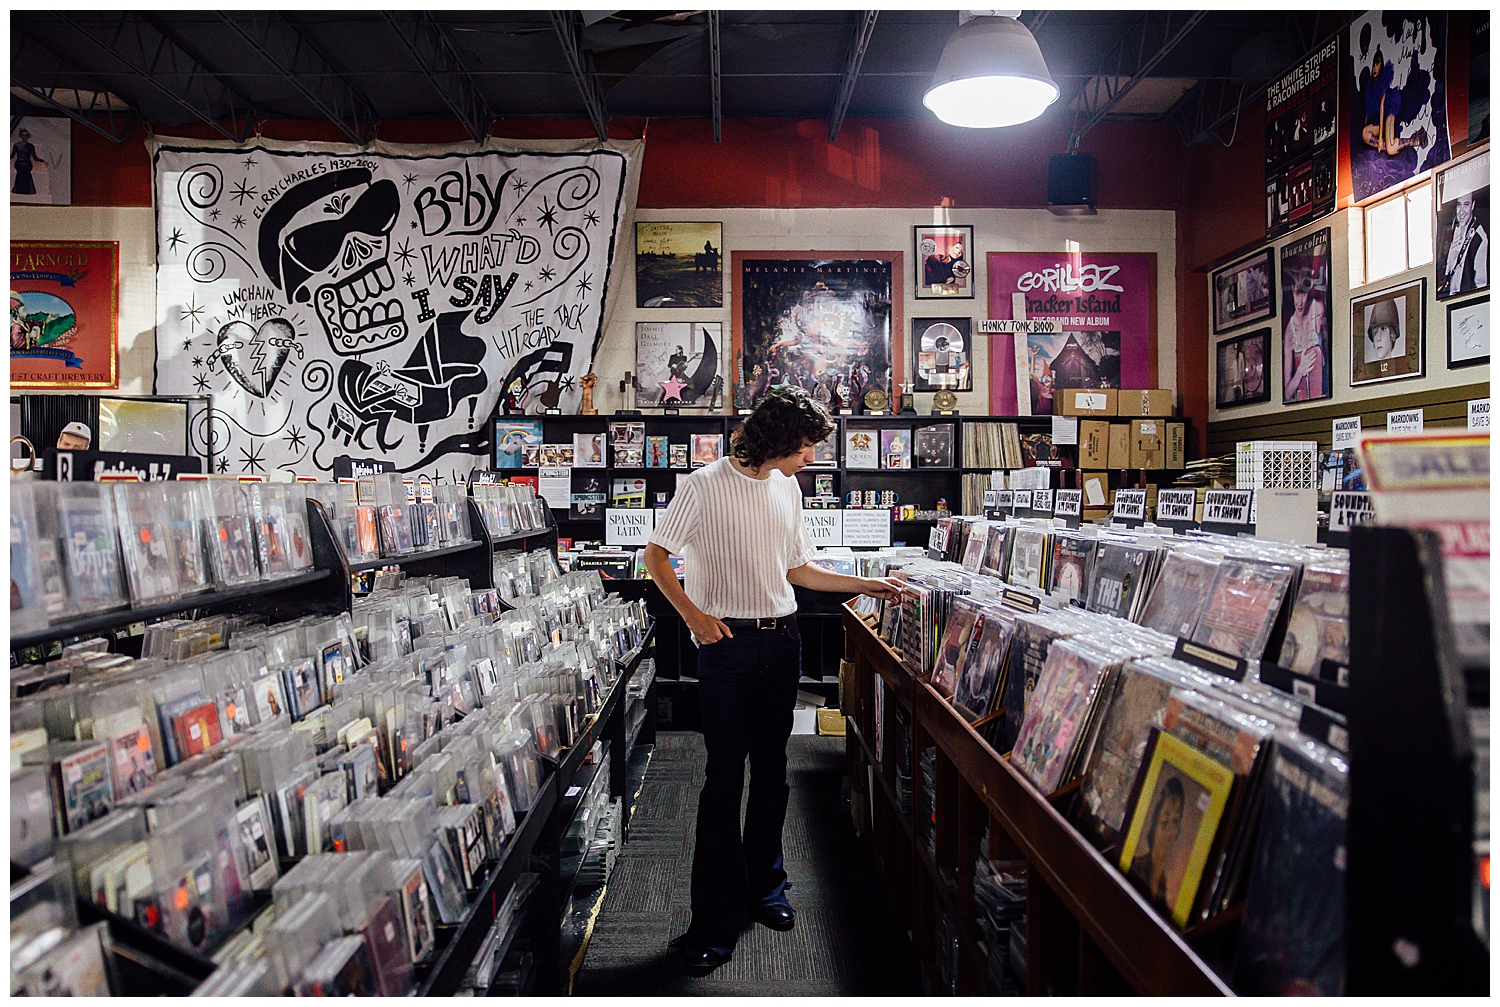 high school senior guy in black jeans, white tshirt looking at row of records inside Cactus Record store